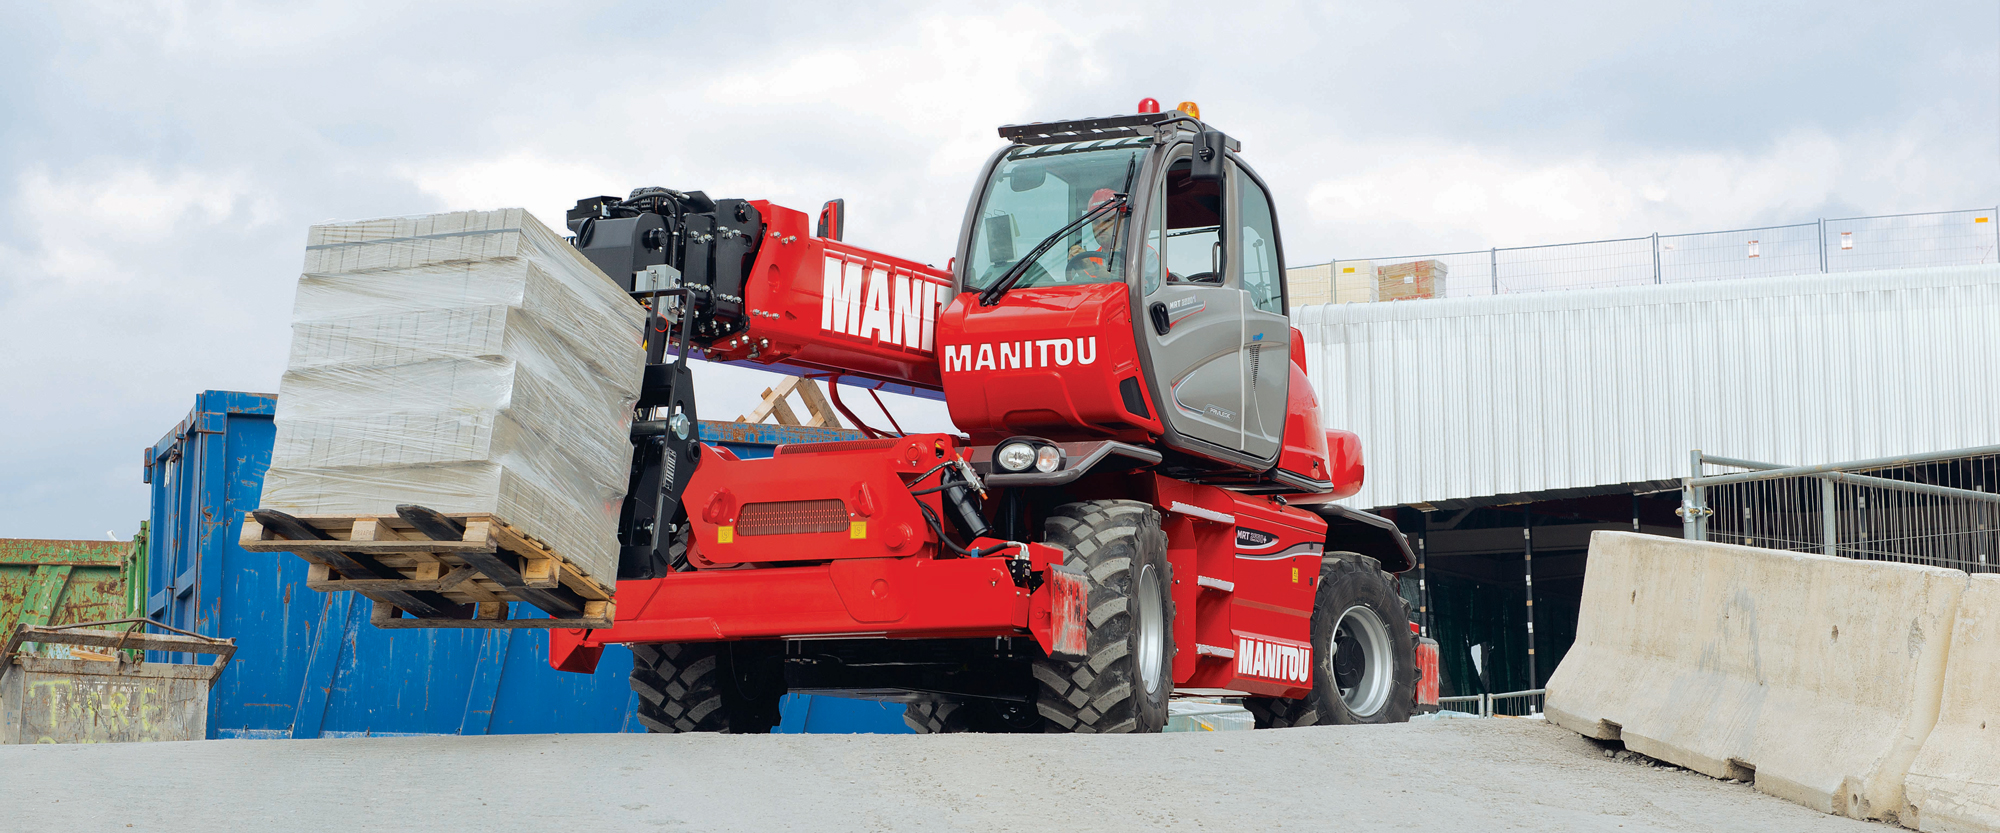 manitou-mrt-chariot-elevateur-occasion-manutention